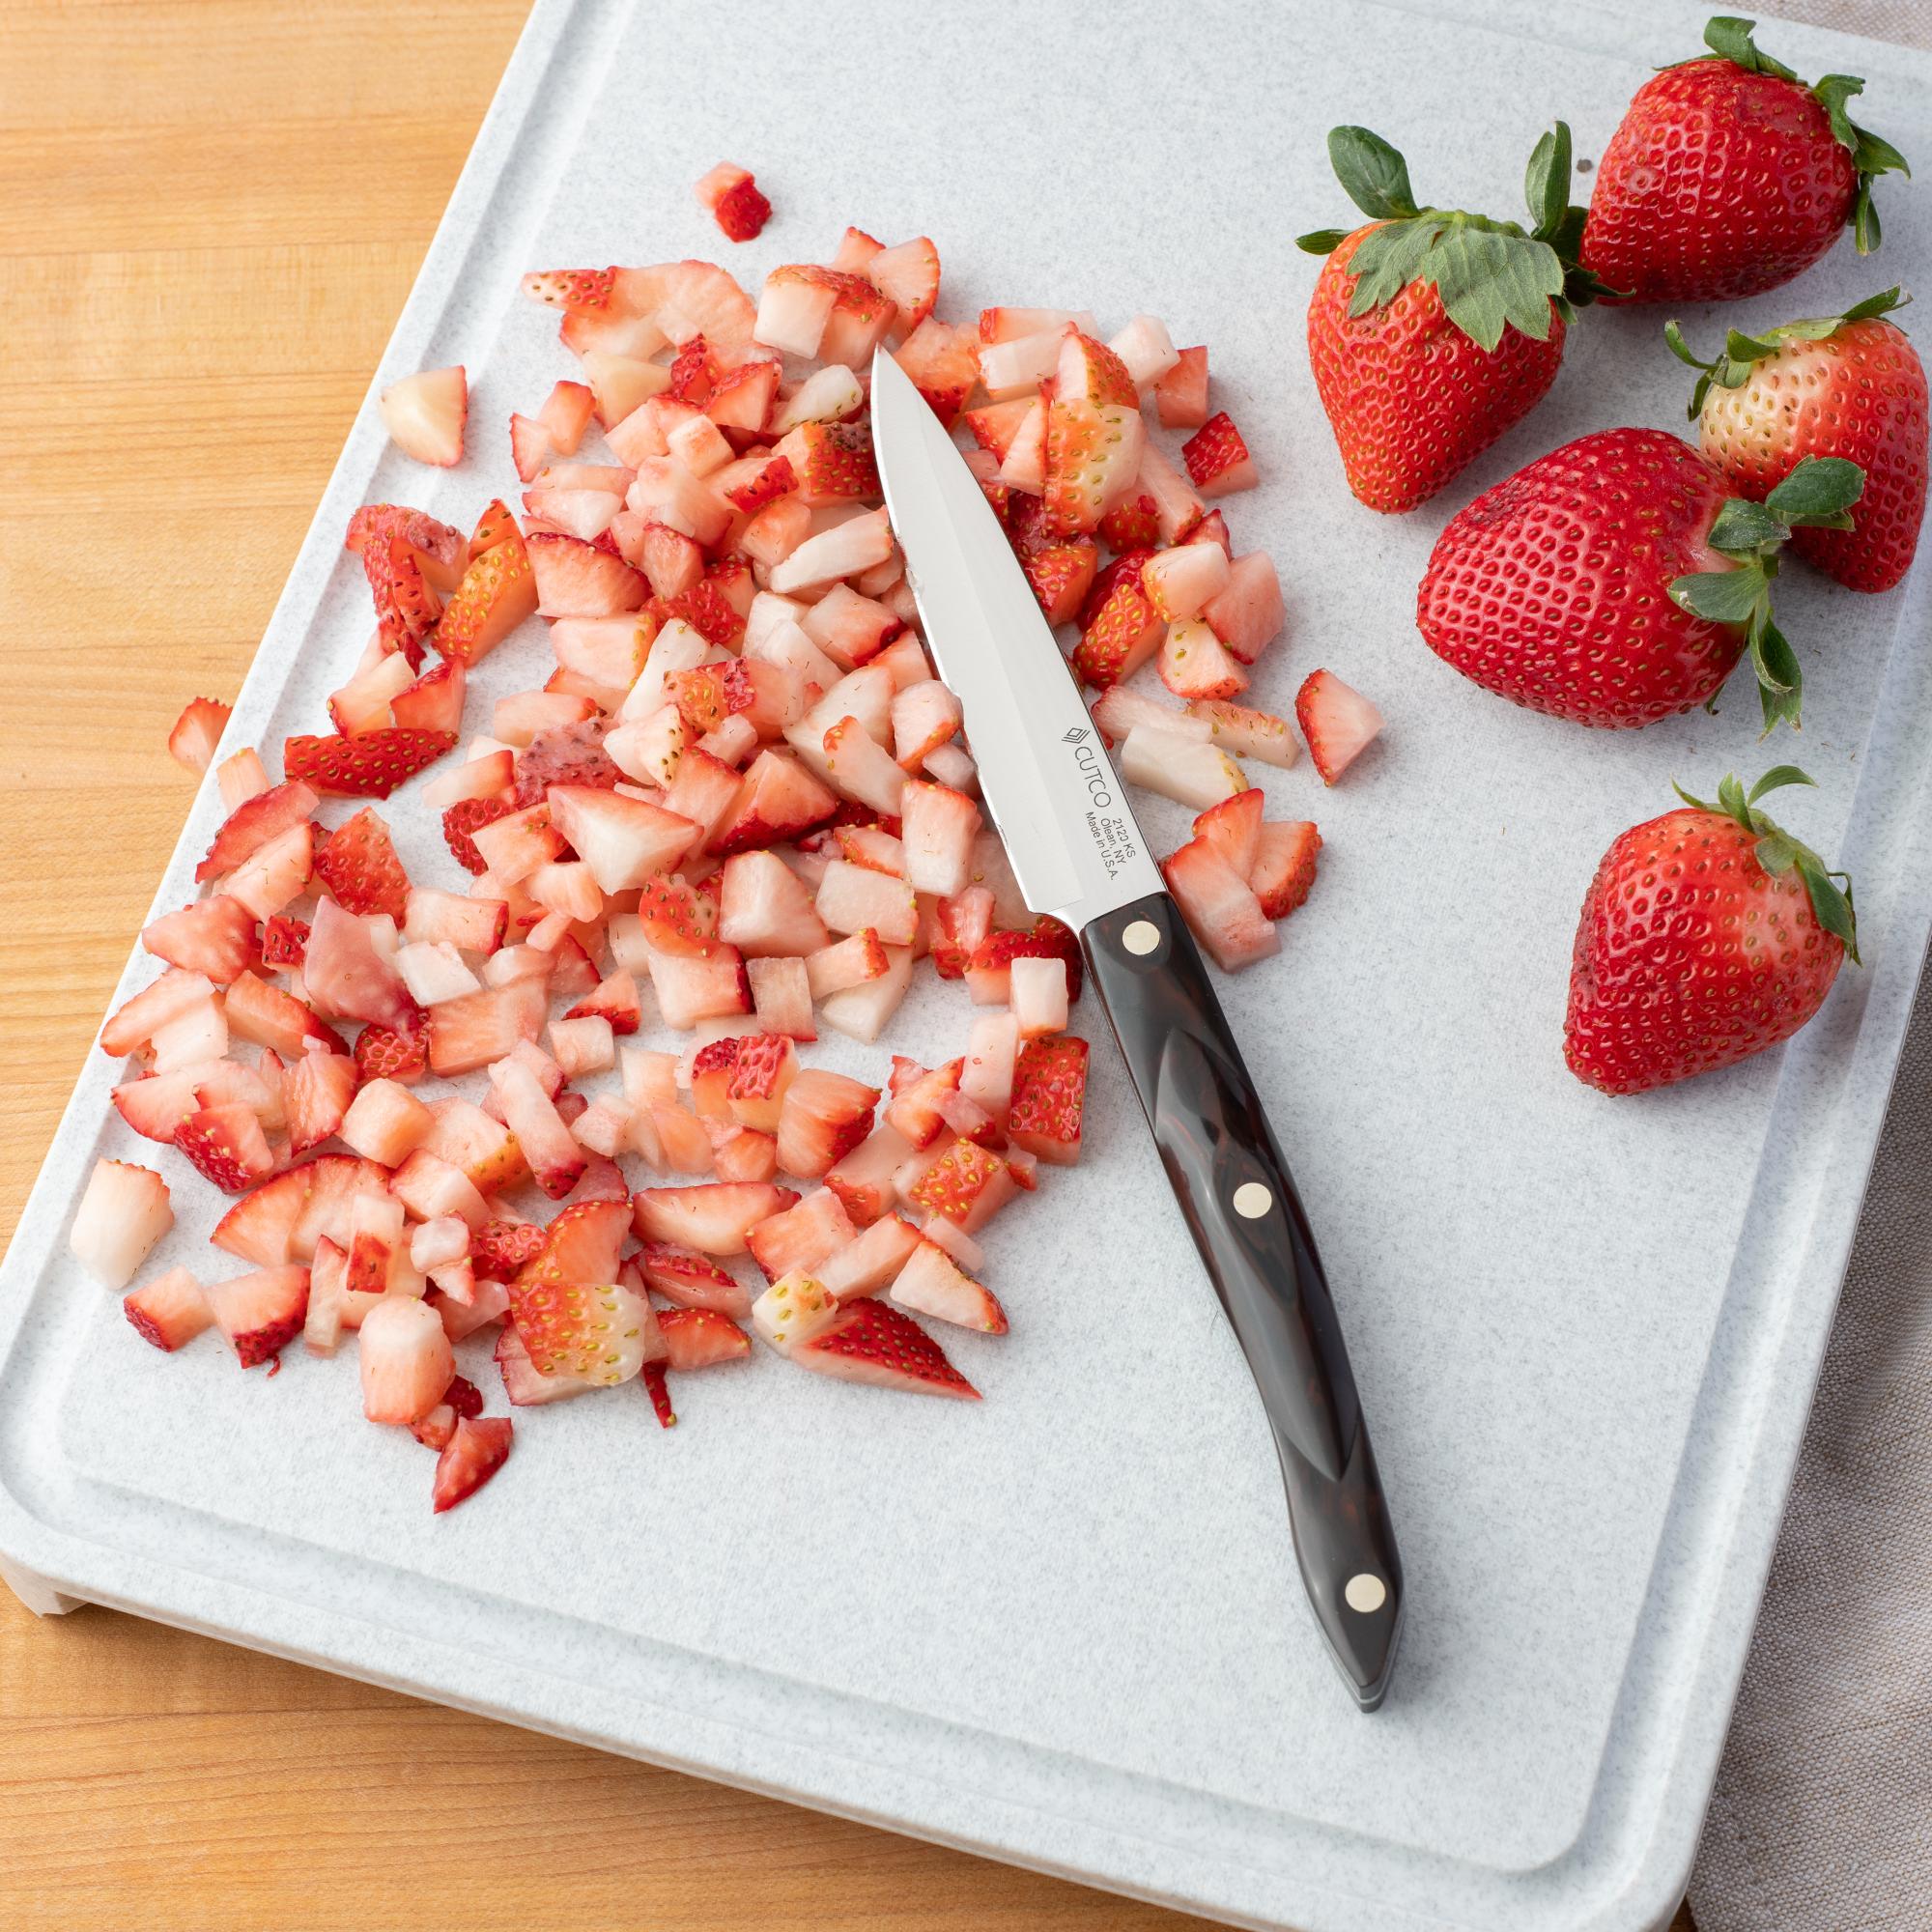 Sliced strawberries with a 4 inch Paring Knife.